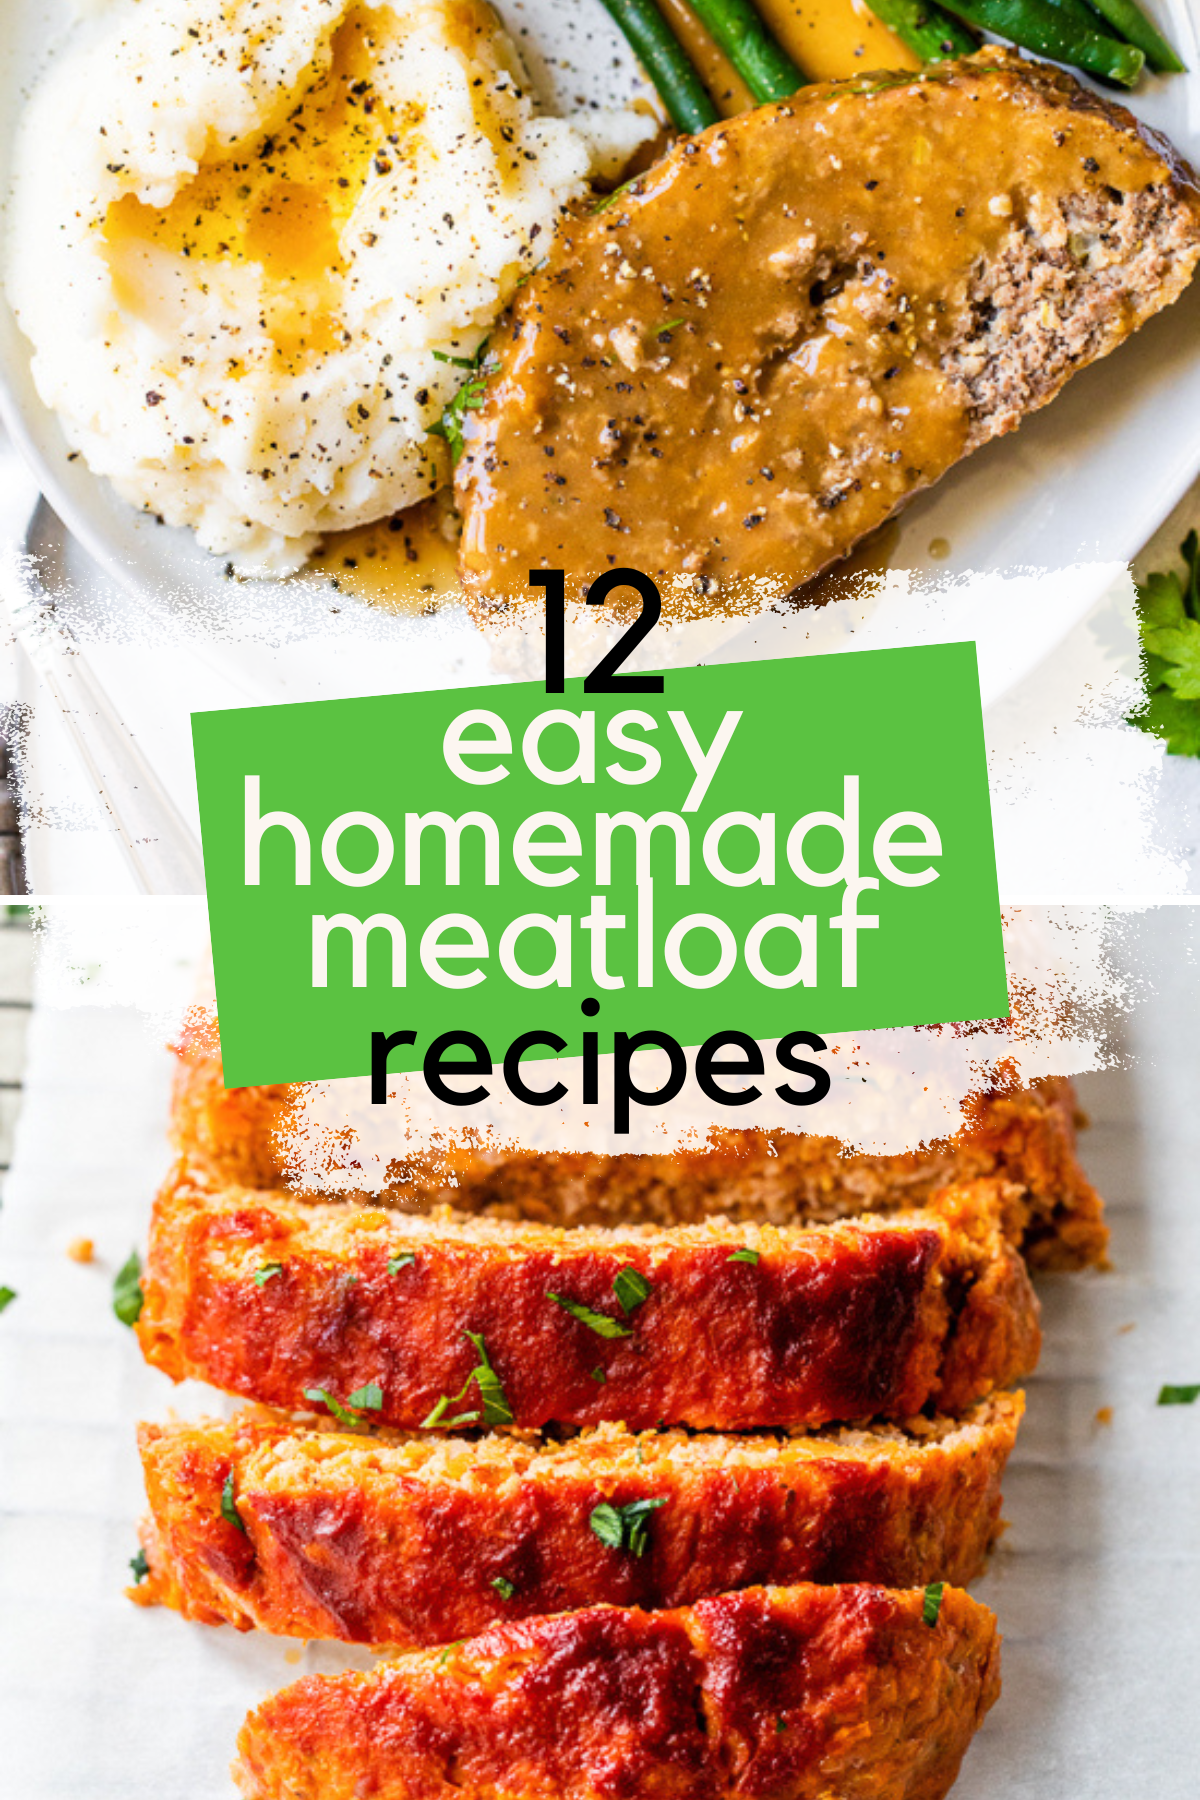 12 Easy Homemade Meatloaf Recipes